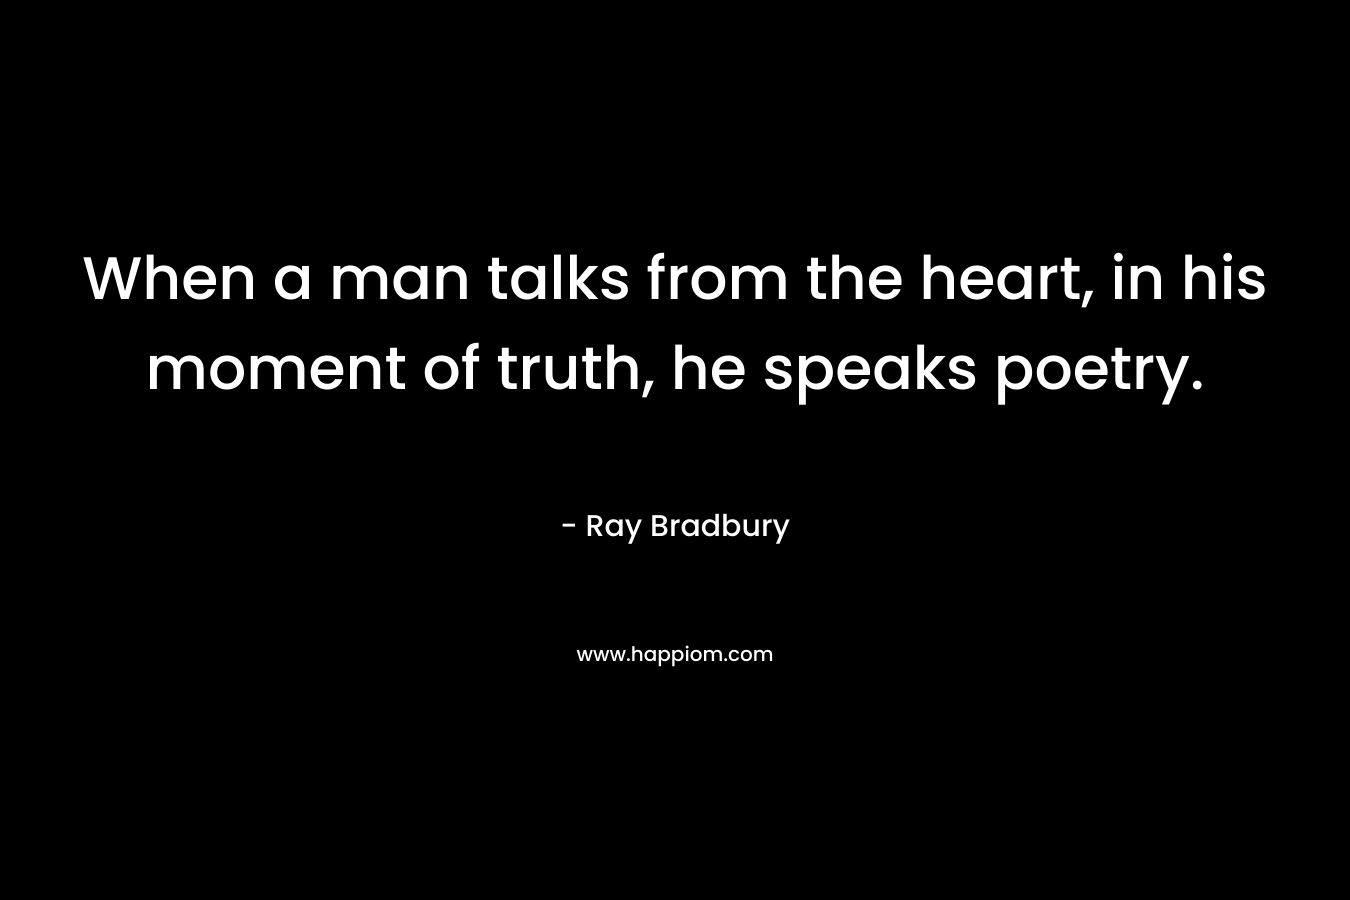 When a man talks from the heart, in his moment of truth, he speaks poetry. – Ray Bradbury